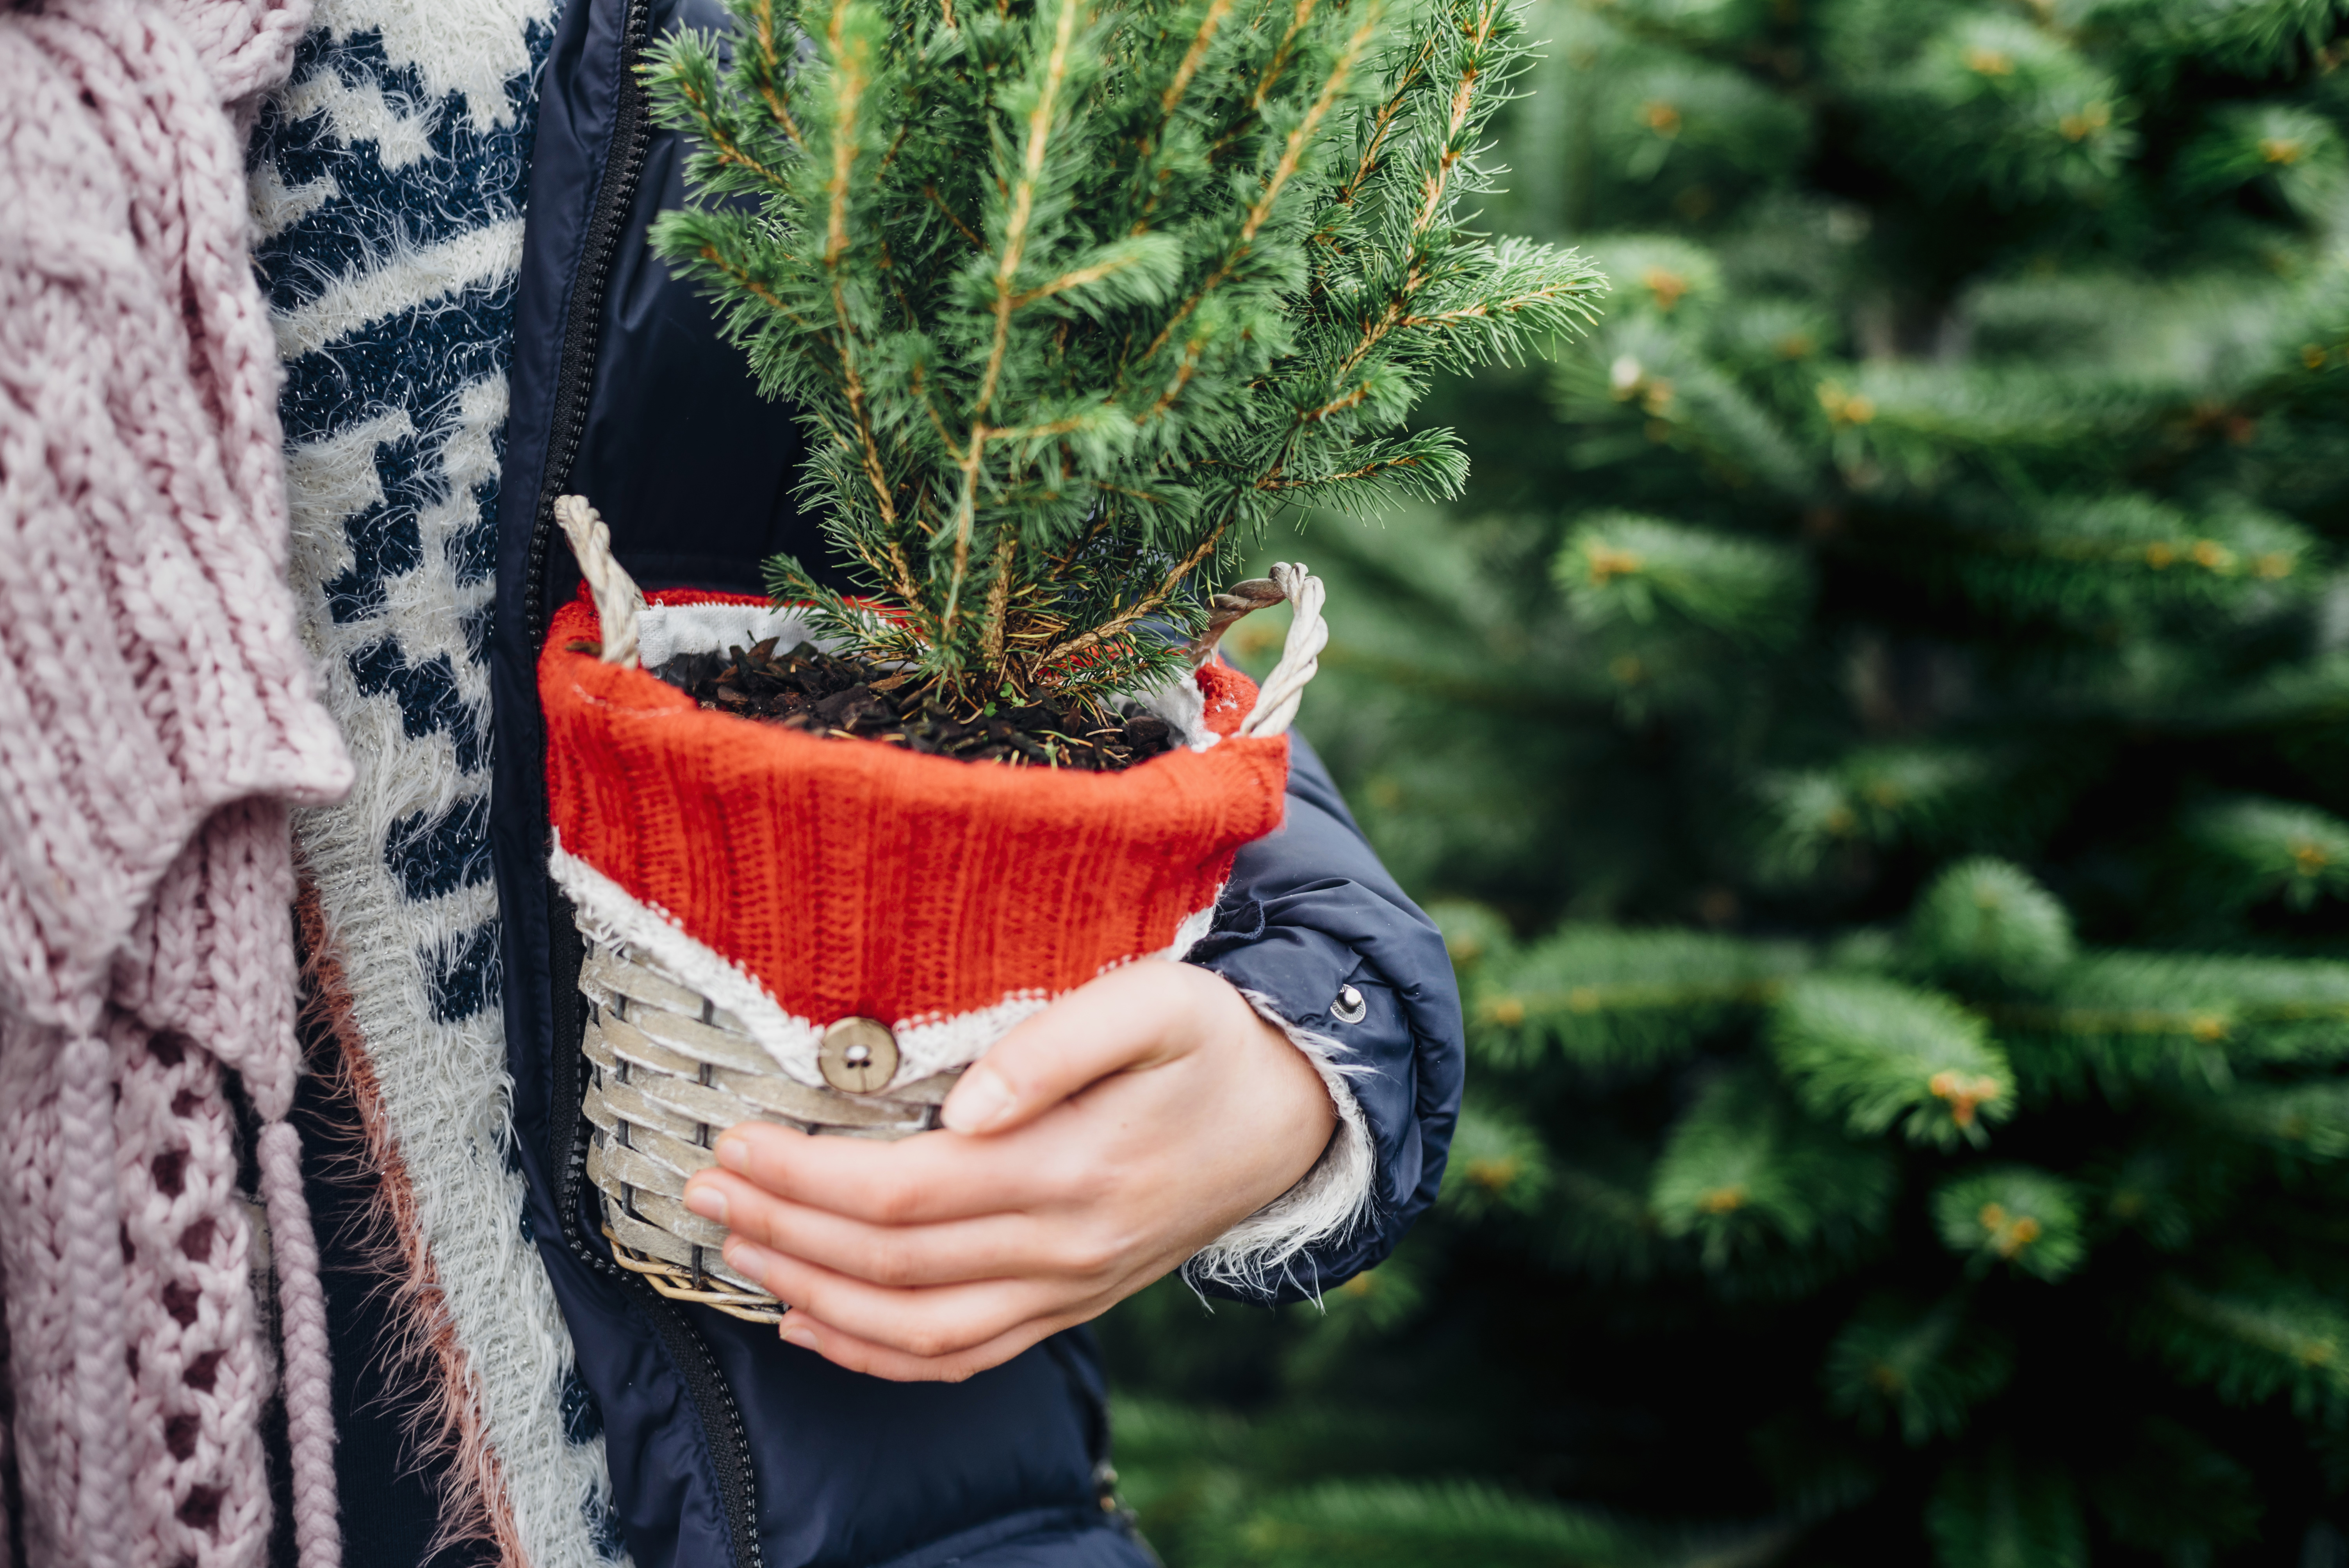 We reveal how you can reuse your Christmas tree